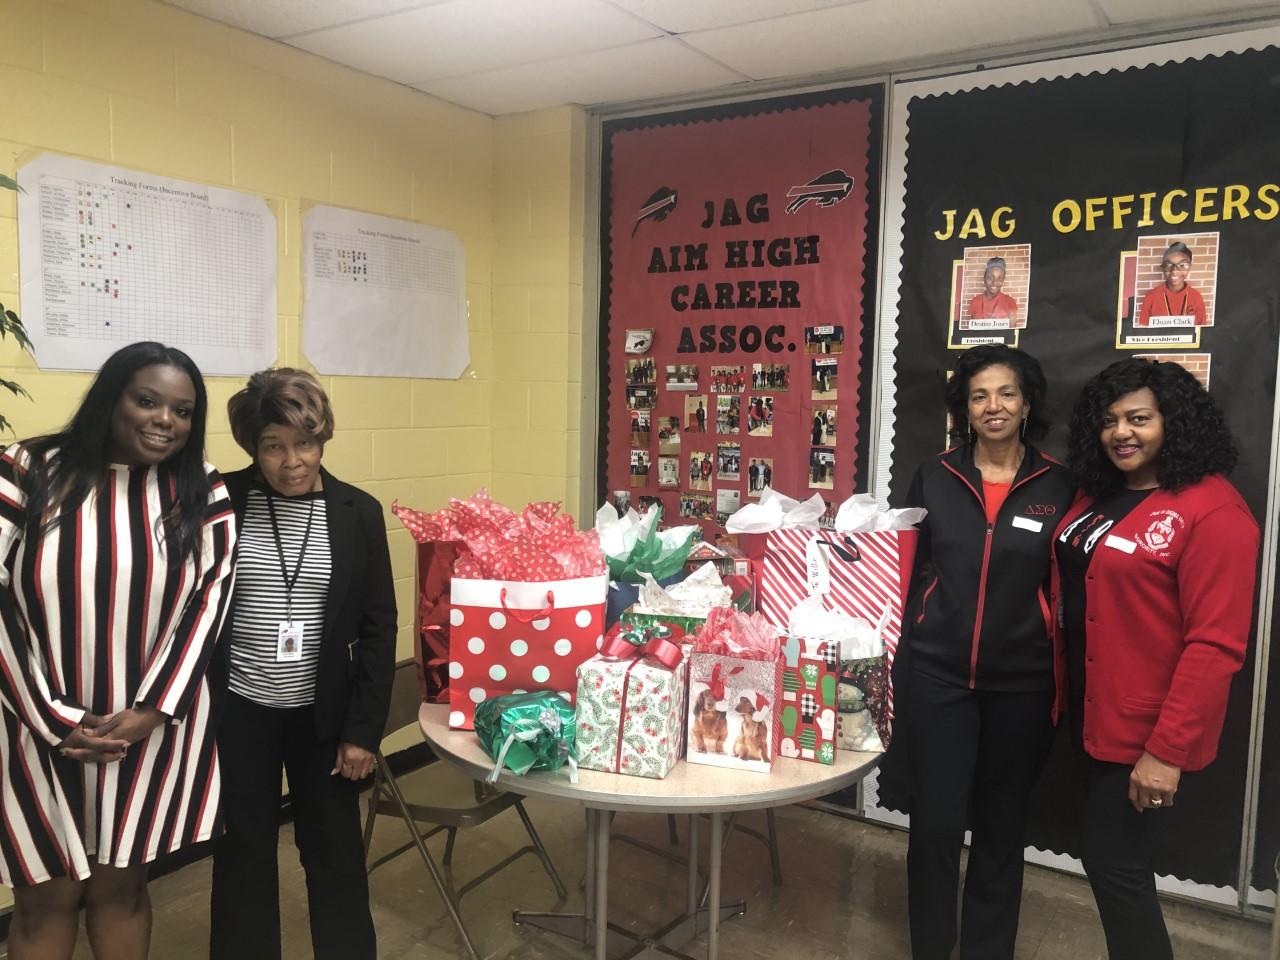  Baker Middle JAGS receiving Christmas gifts from the community